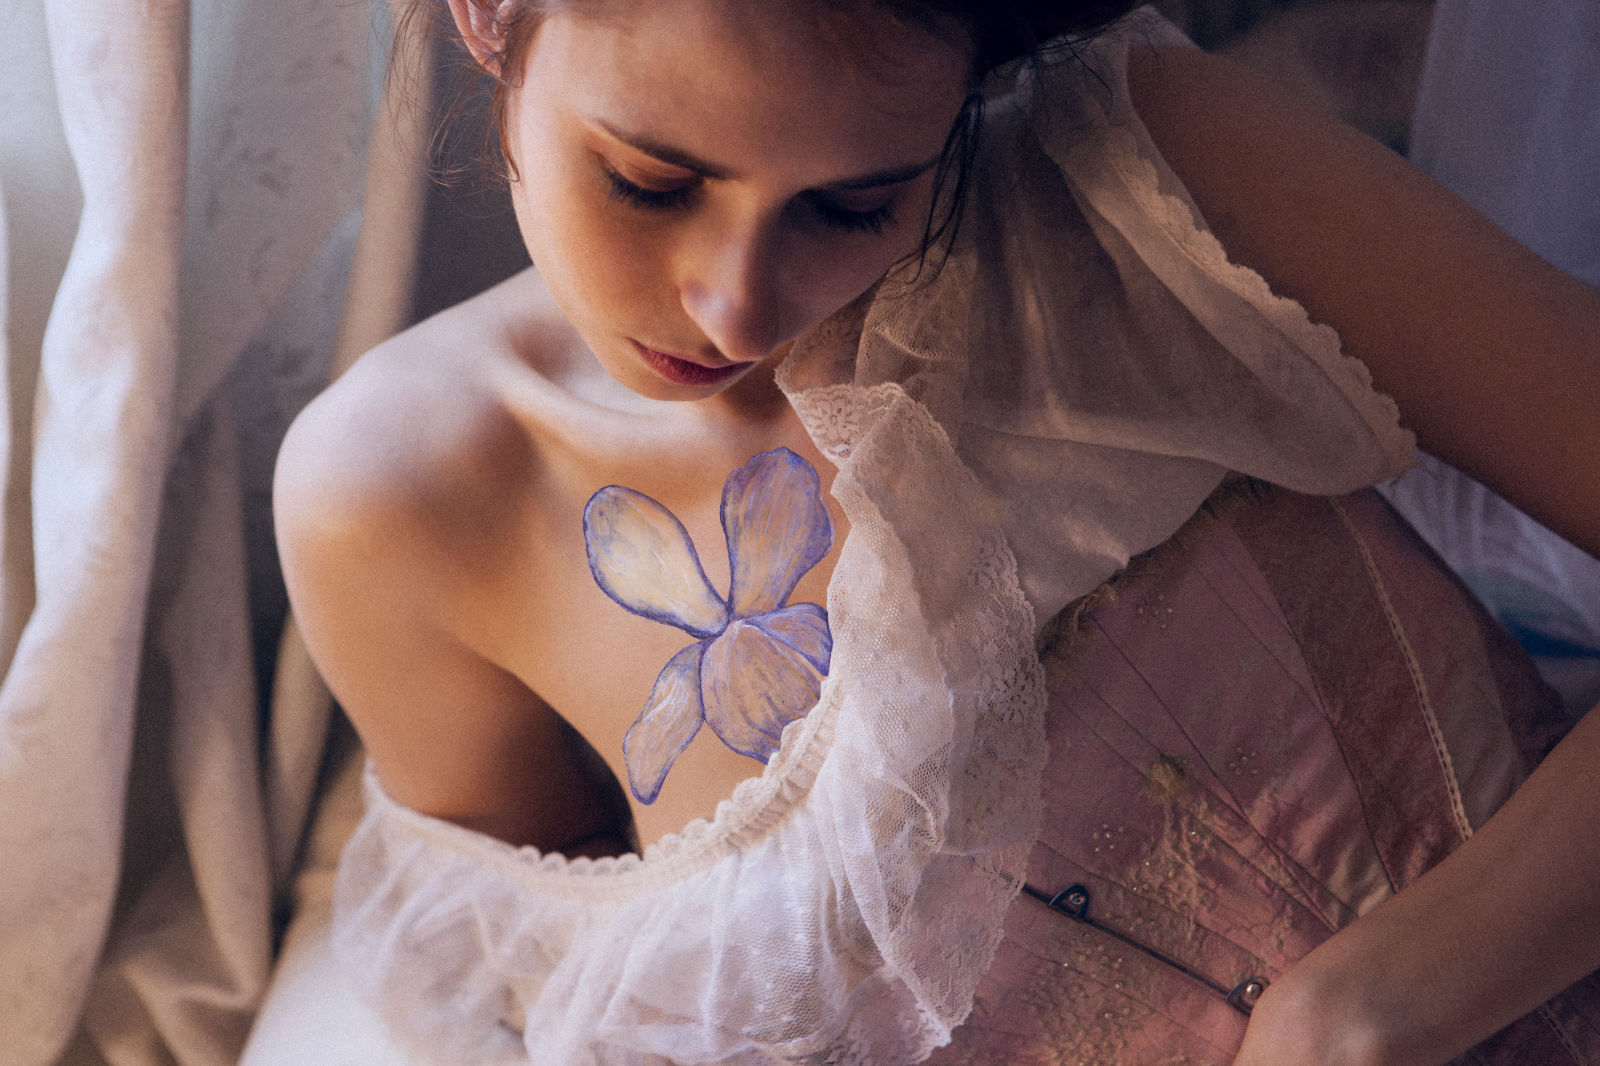 “À la deux fois née”, a mixed media collaboration between poetess and model Anne-Rebecca Willing, photographer Solène Ballesta and messalyn for the watercoloured violets.